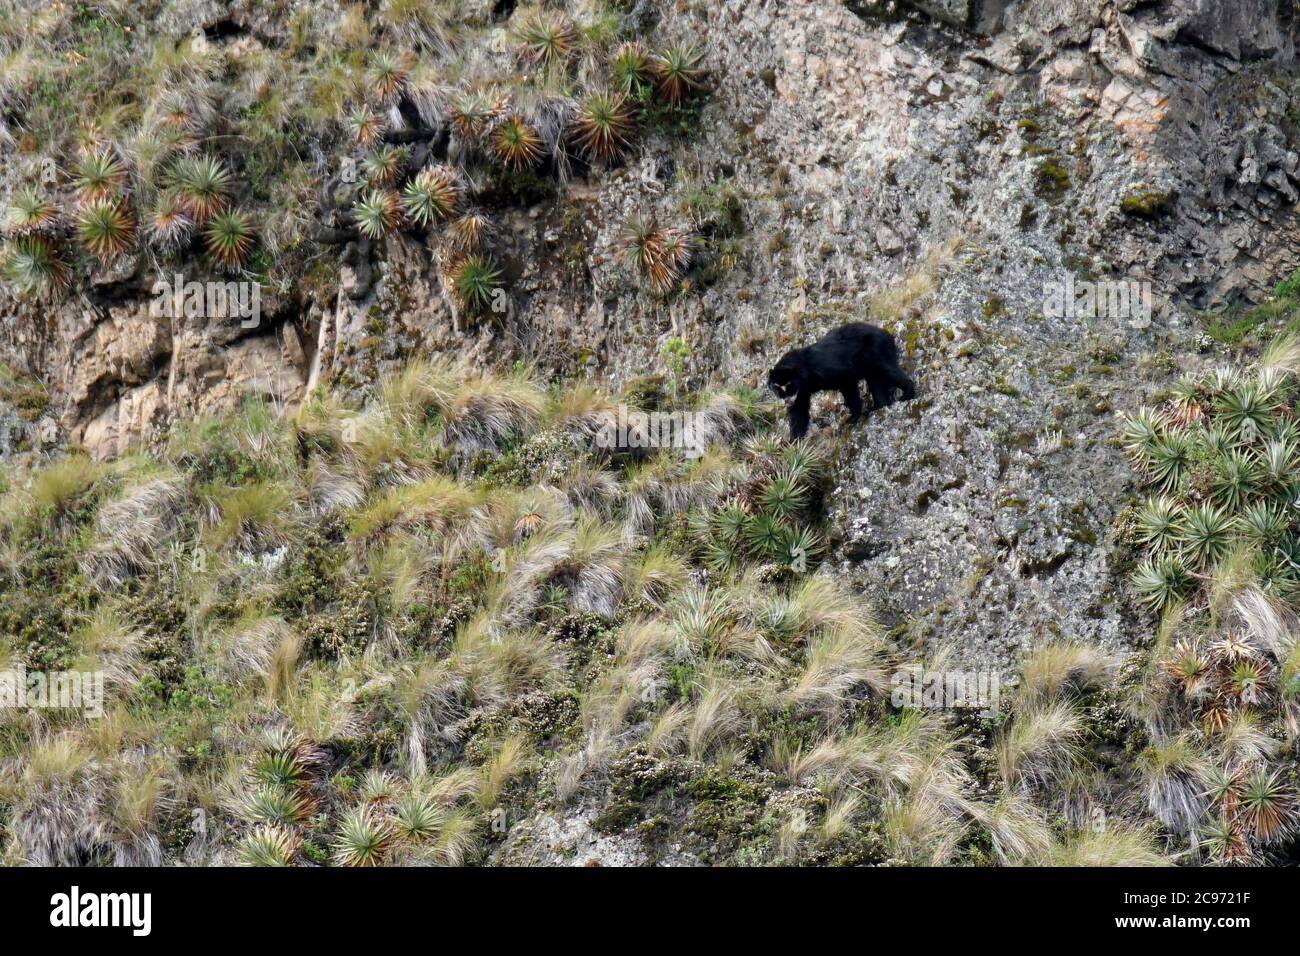 Spectacled bear, Andean bear, Andean short-faced bear (Tremarctos ornatus), climbing at a steep slope, side view, Ecuador, Andes Stock Photo